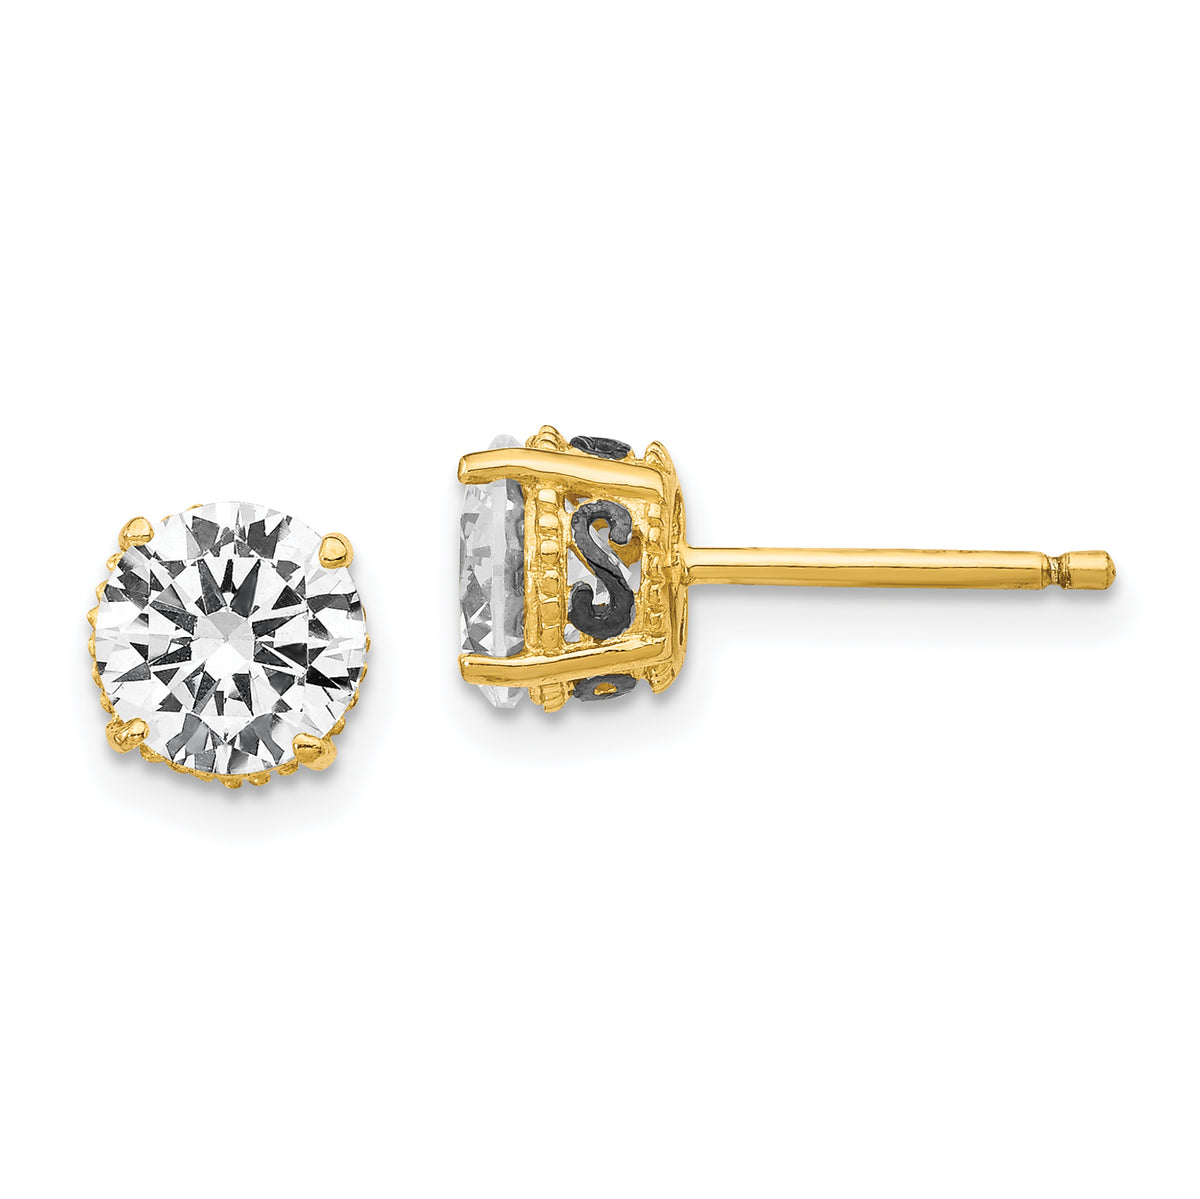 Cheryl M Sterling Silver Gold-plated with Black Rhodium Accent Brilliant-cut 6.5mm CZ Stud Post Earrings